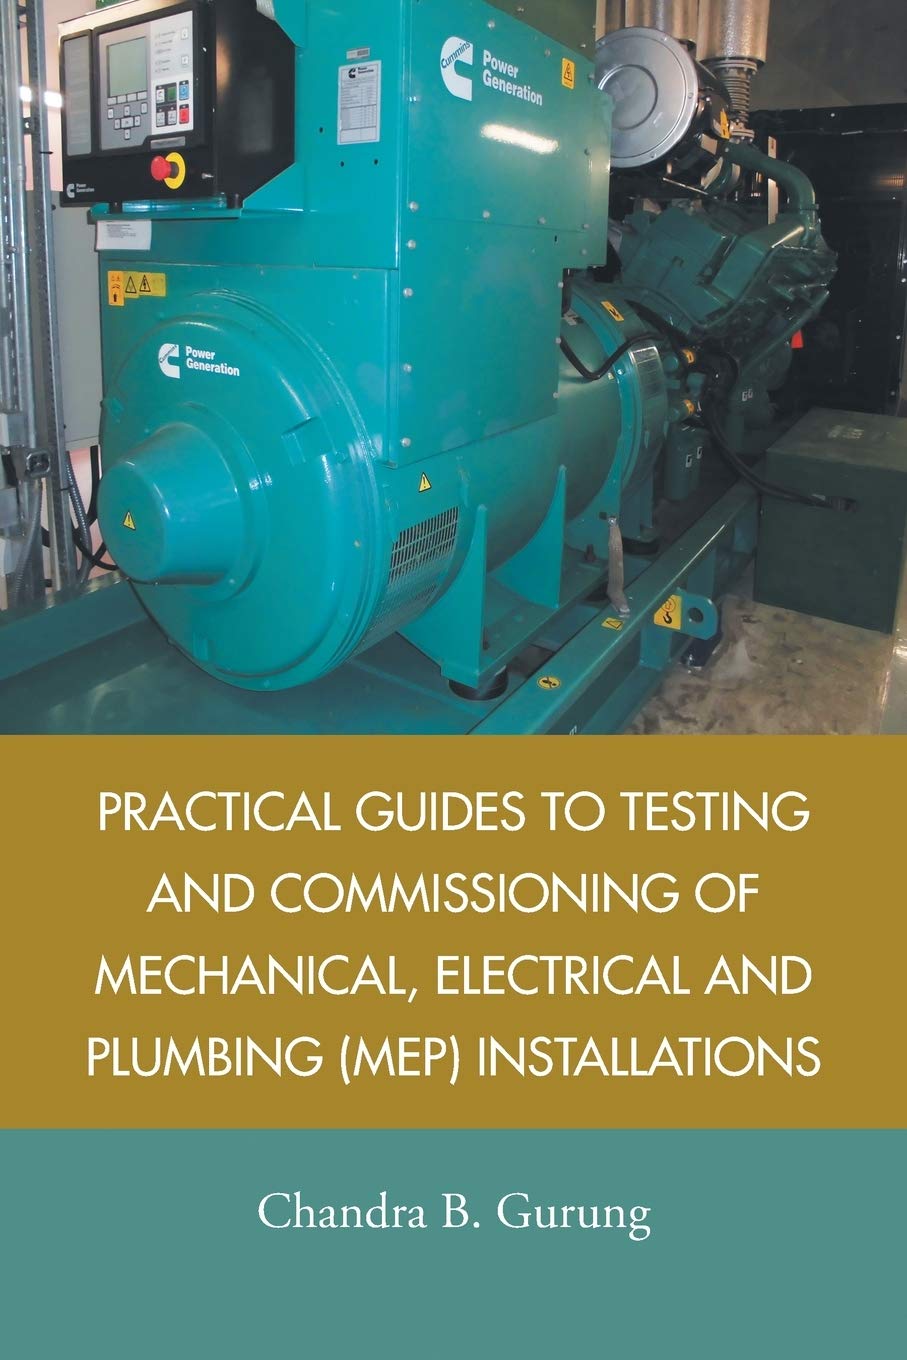 Practical Guides to Testing and Commissioning Review